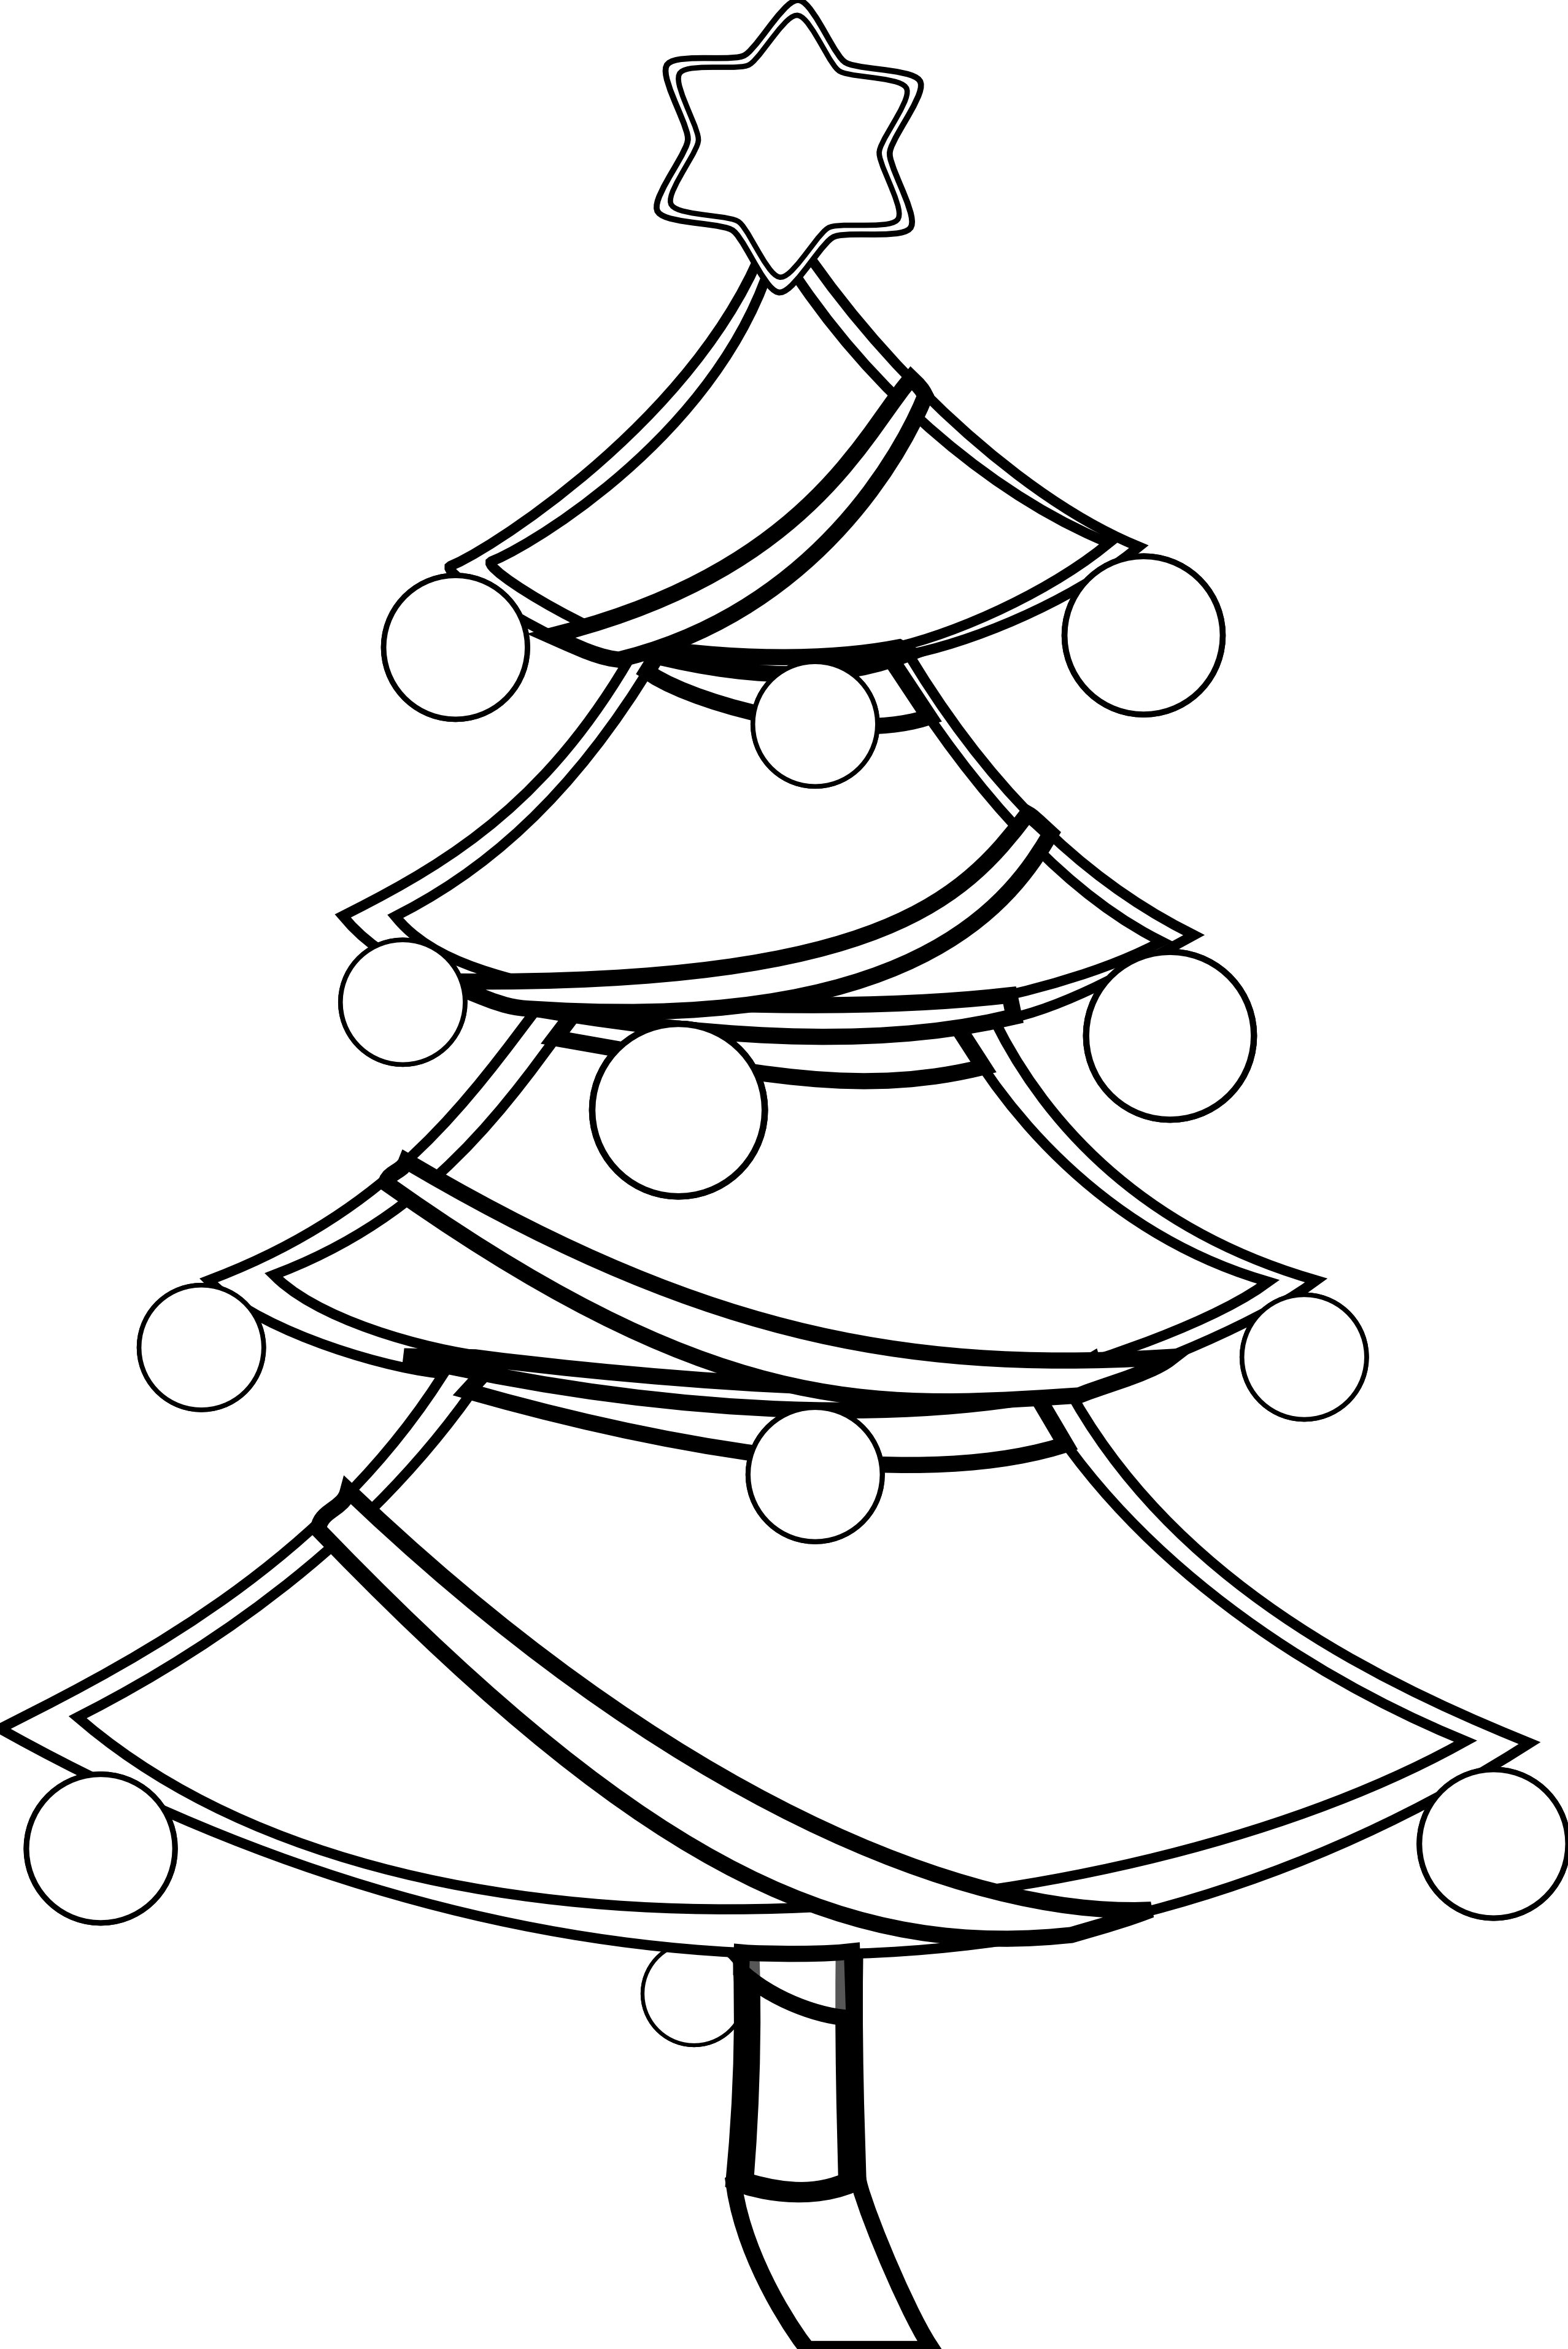 Free Christmas Black And White Image, Download Free Clip Art, Free Clip Art on Clipart Library